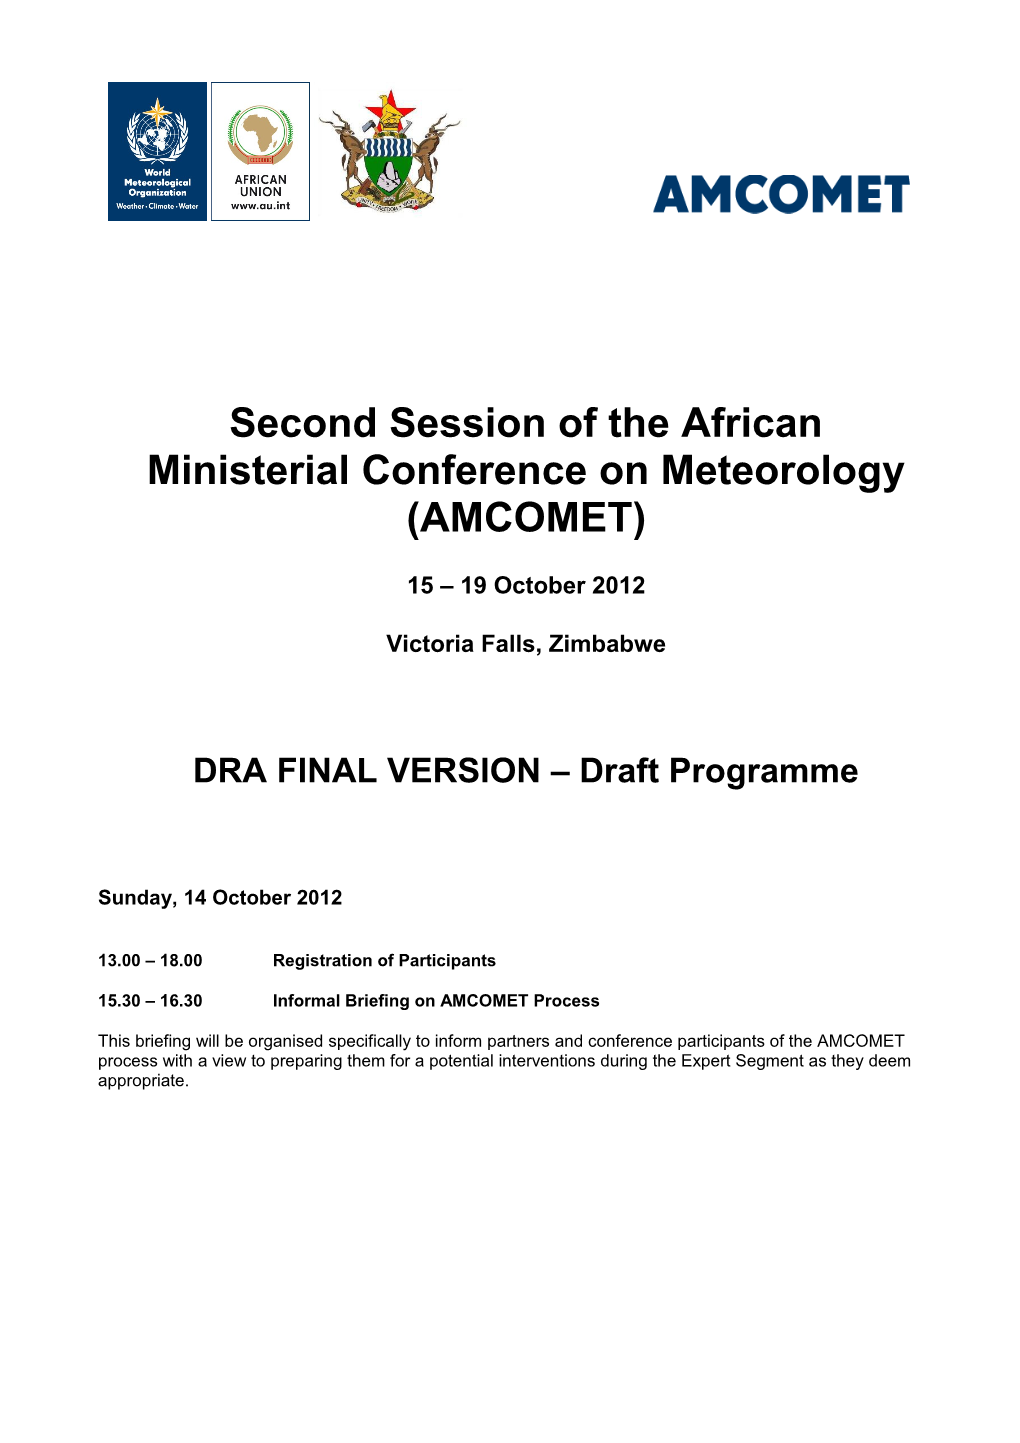 Second Session of the African Ministerial Conference on Meteorology (AMCOMET)